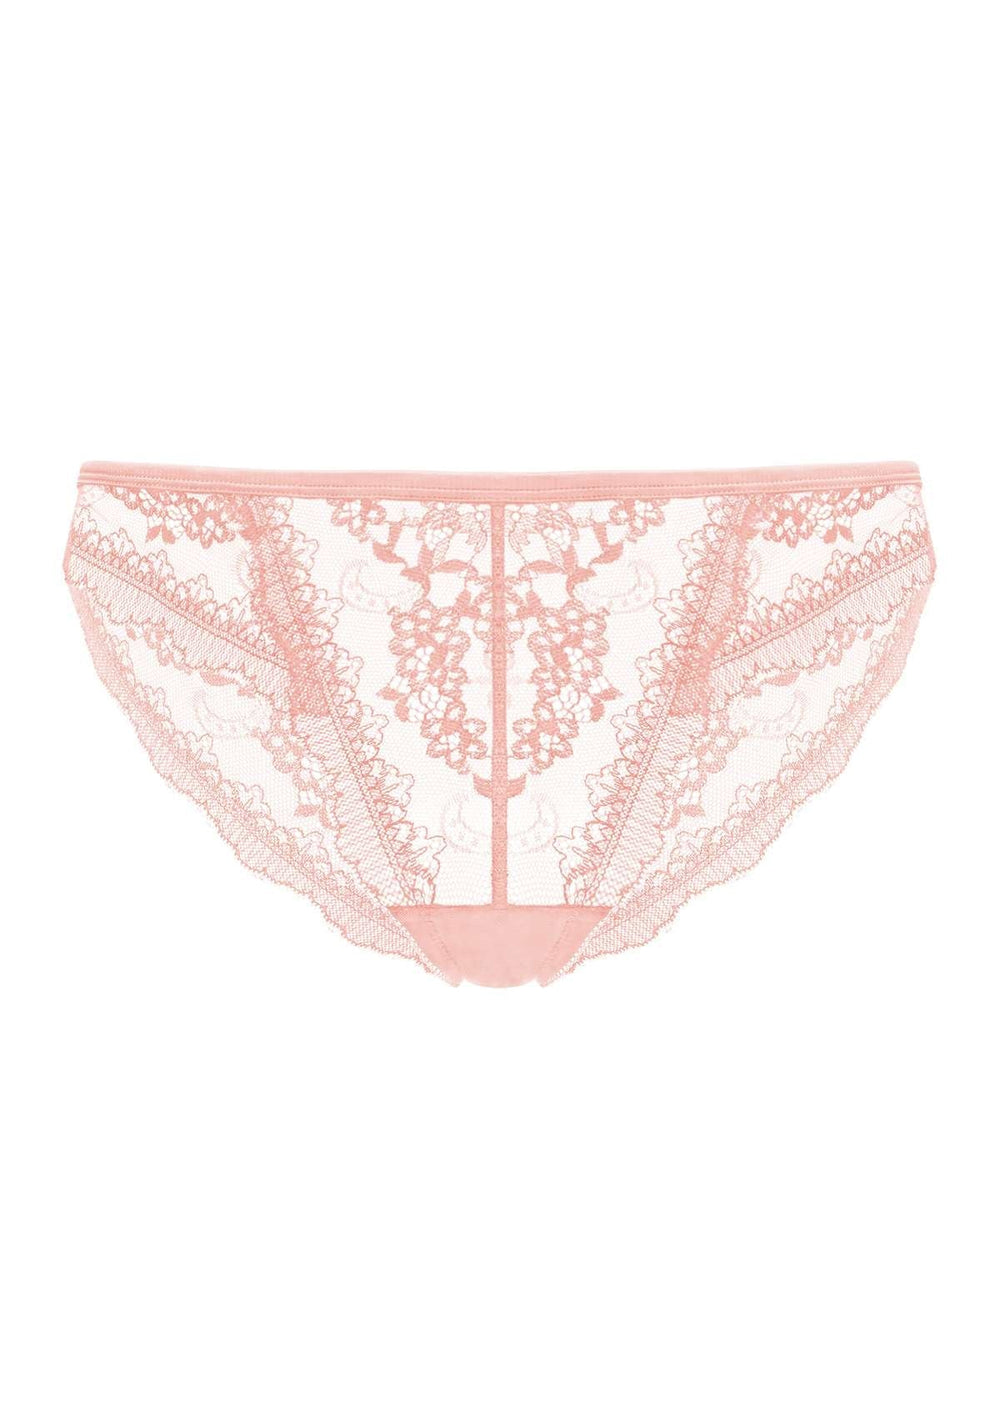 HSIA Anemone Lace Mesh Dolphin-Patterned Mid-Low Rise Bikini Underwear